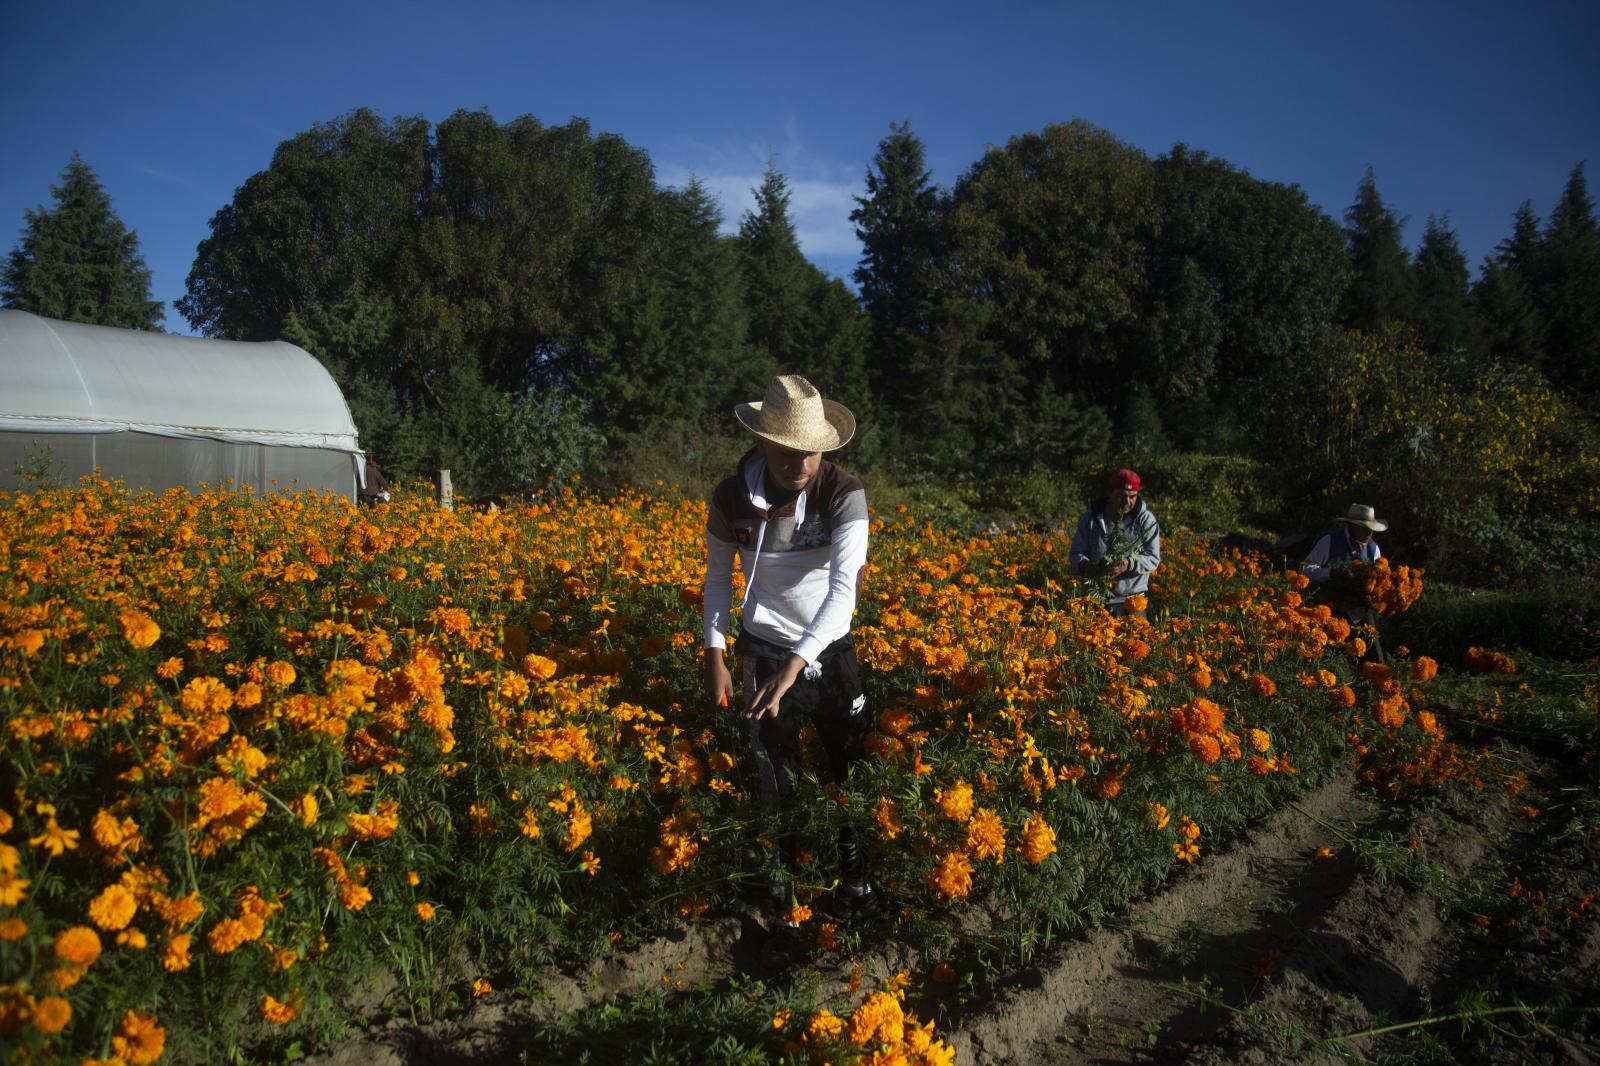 A worker harvests Cempas&uacute;chil flowers in the neighborhood of San Pedro Mexicaltzingo, Puebla, Mexico on Sunday, October 25, 2020. In the midst of the Covid pandemic, farm workers have been affected by the low sales of this flower, which is traditionally used in Day of the Dead offerings in Mexico. Photographer Koral Carballo /Bloomberg